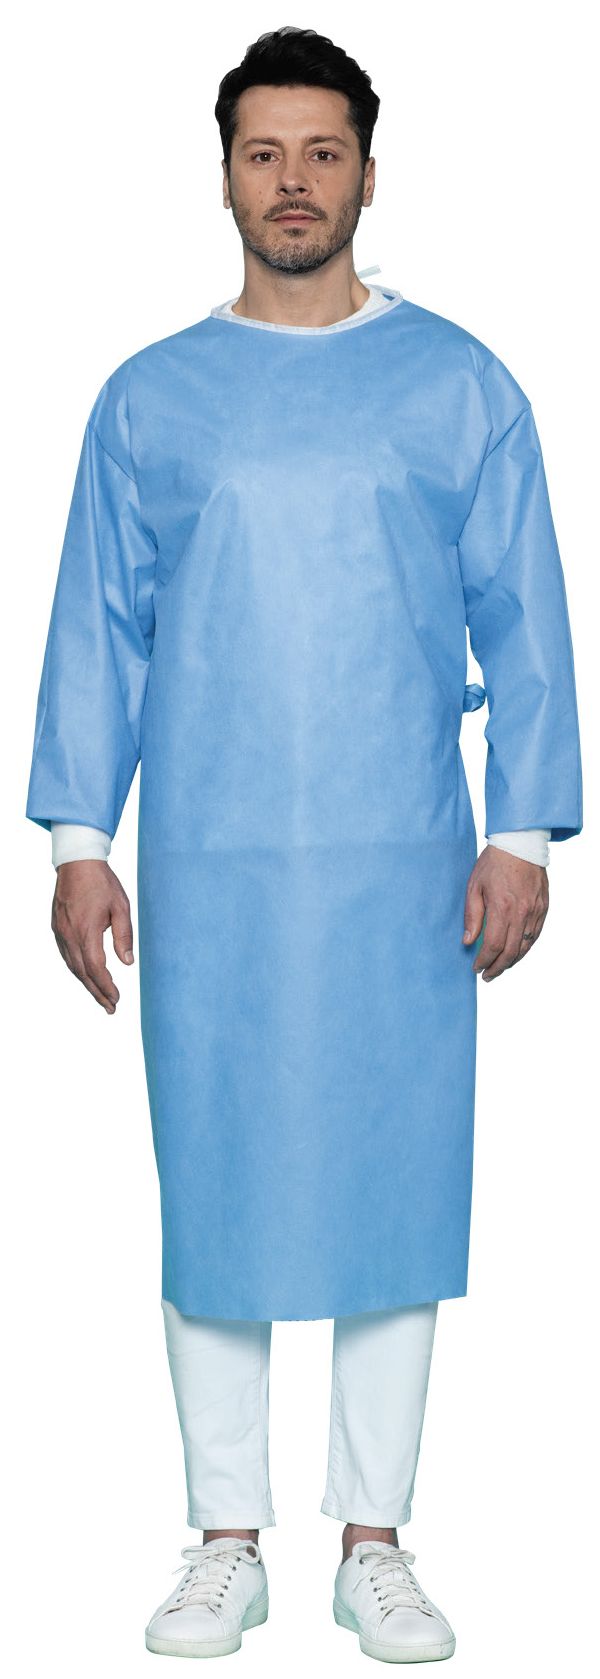 Level 2 Surgical Gown